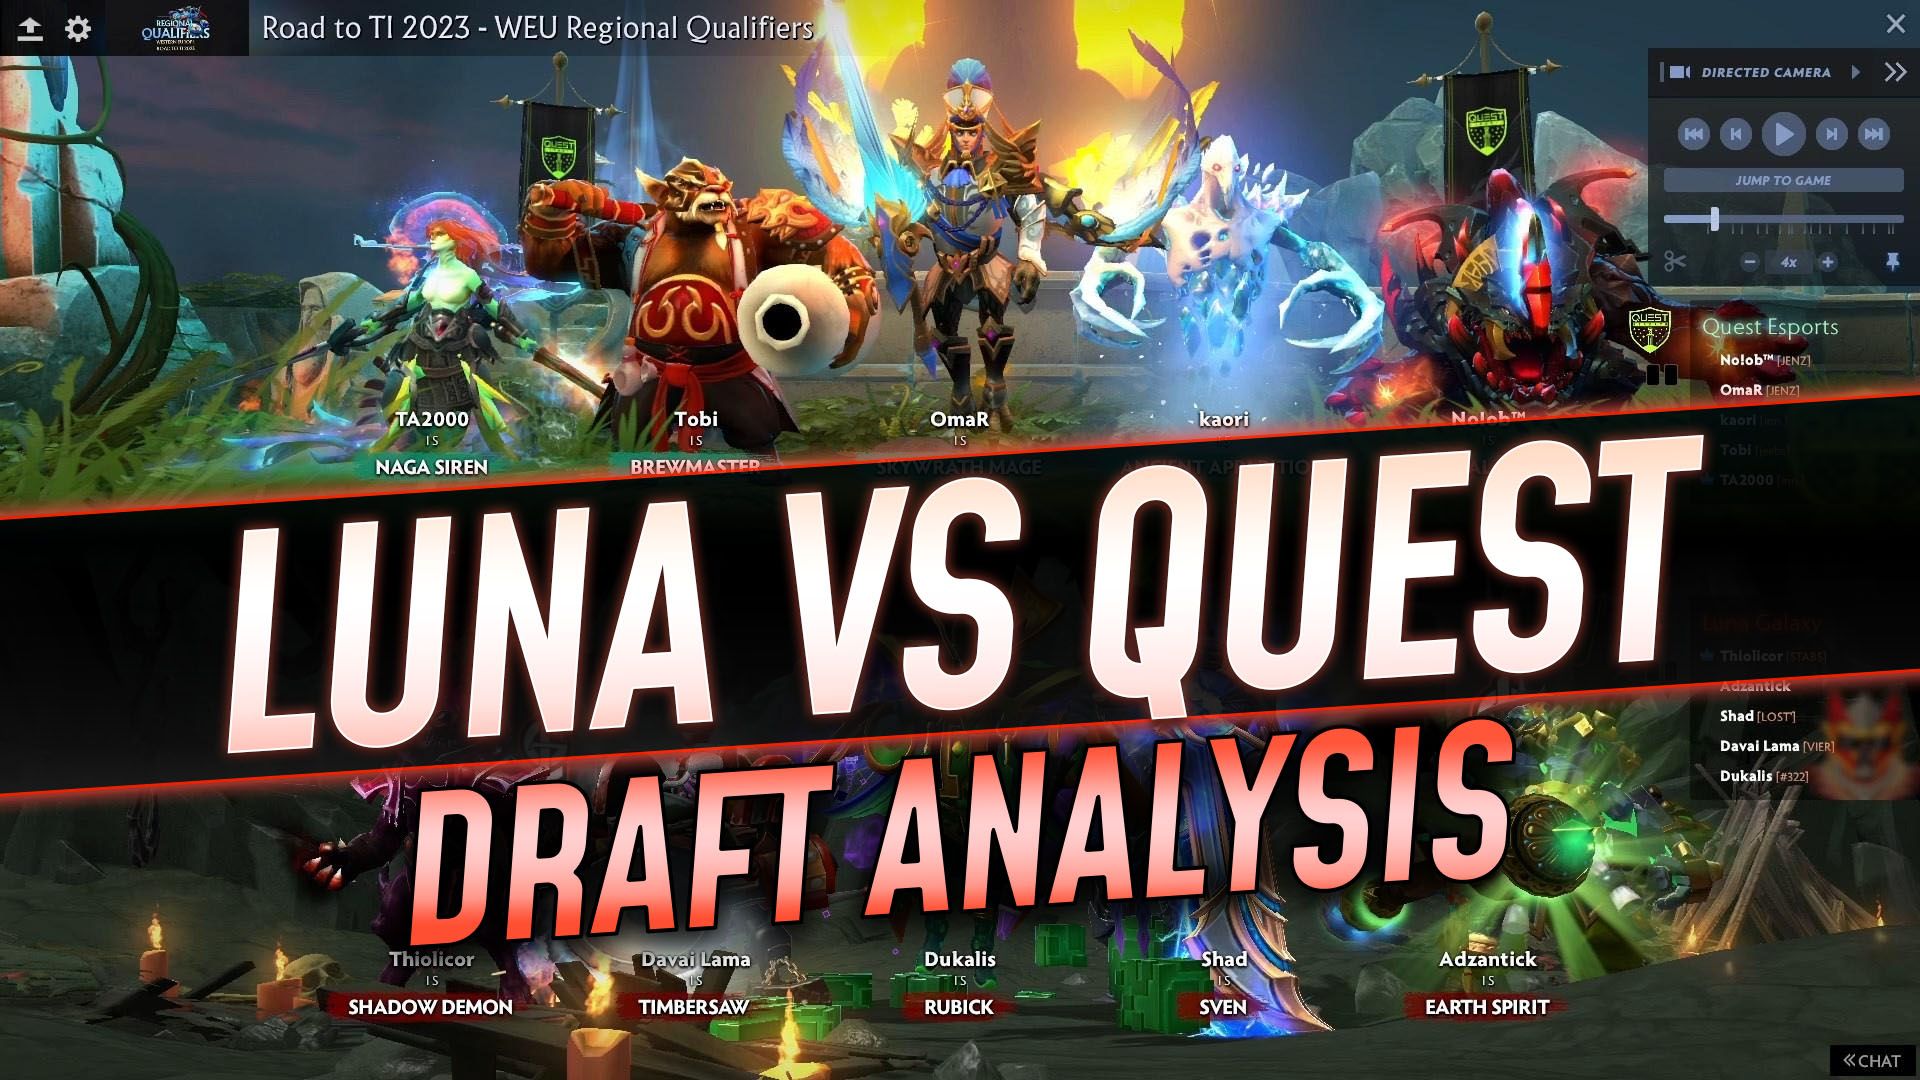 Game Analyticz: Ouro de Tolos